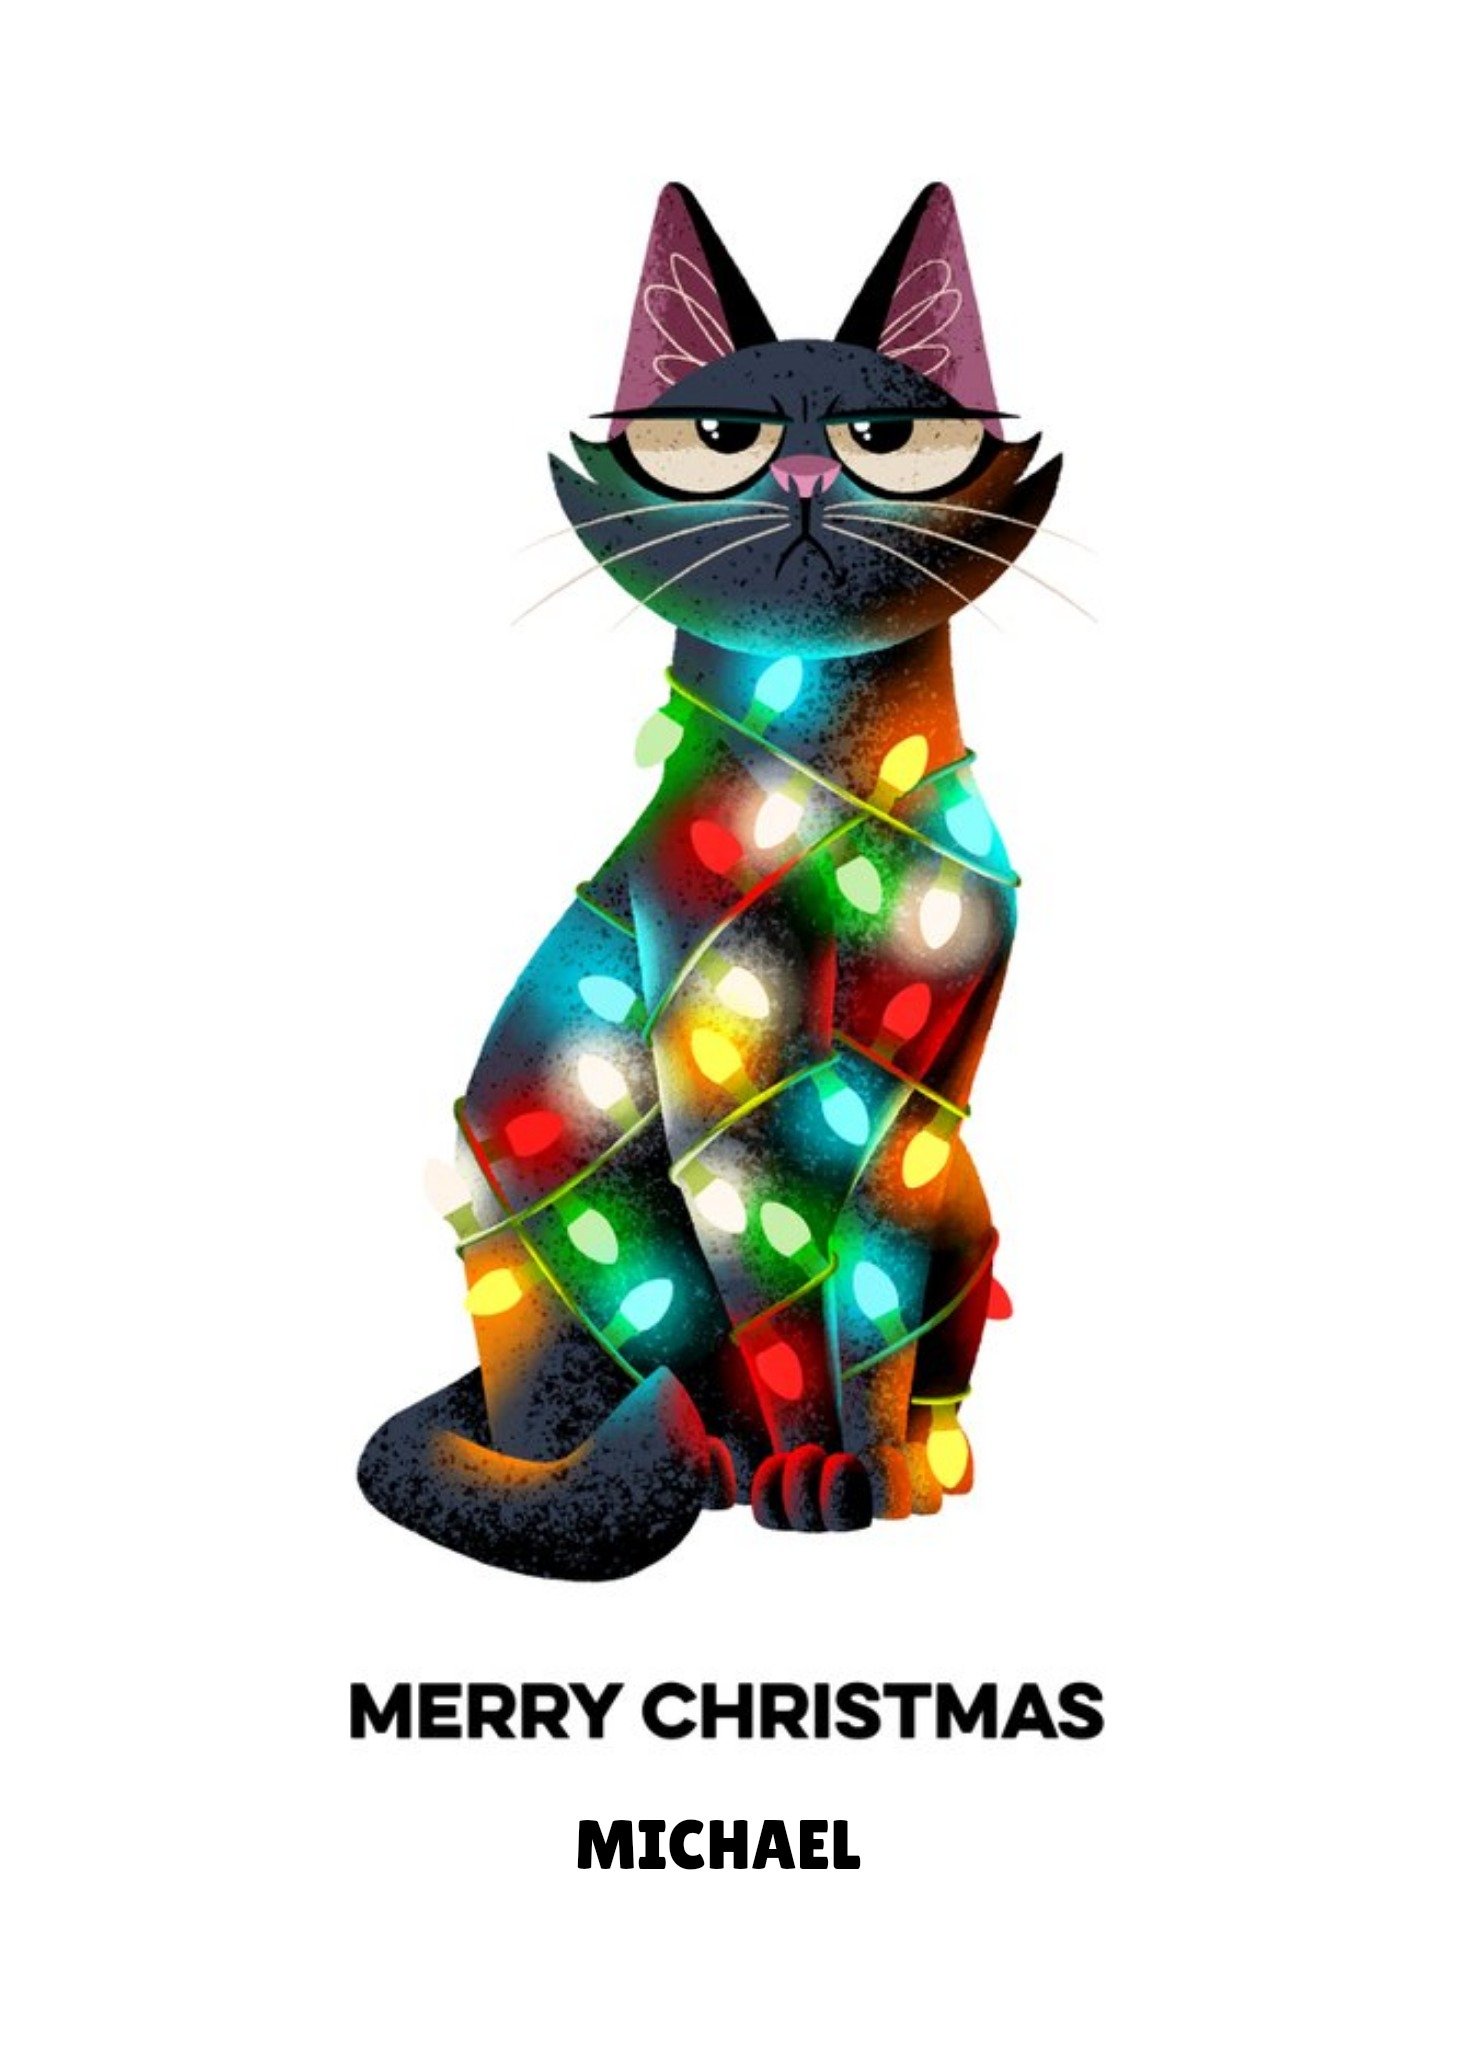 Moonpig Folio Illustration Of A Frowning Cat Tangled In Christmas Lights. Merry Christmas Personalis